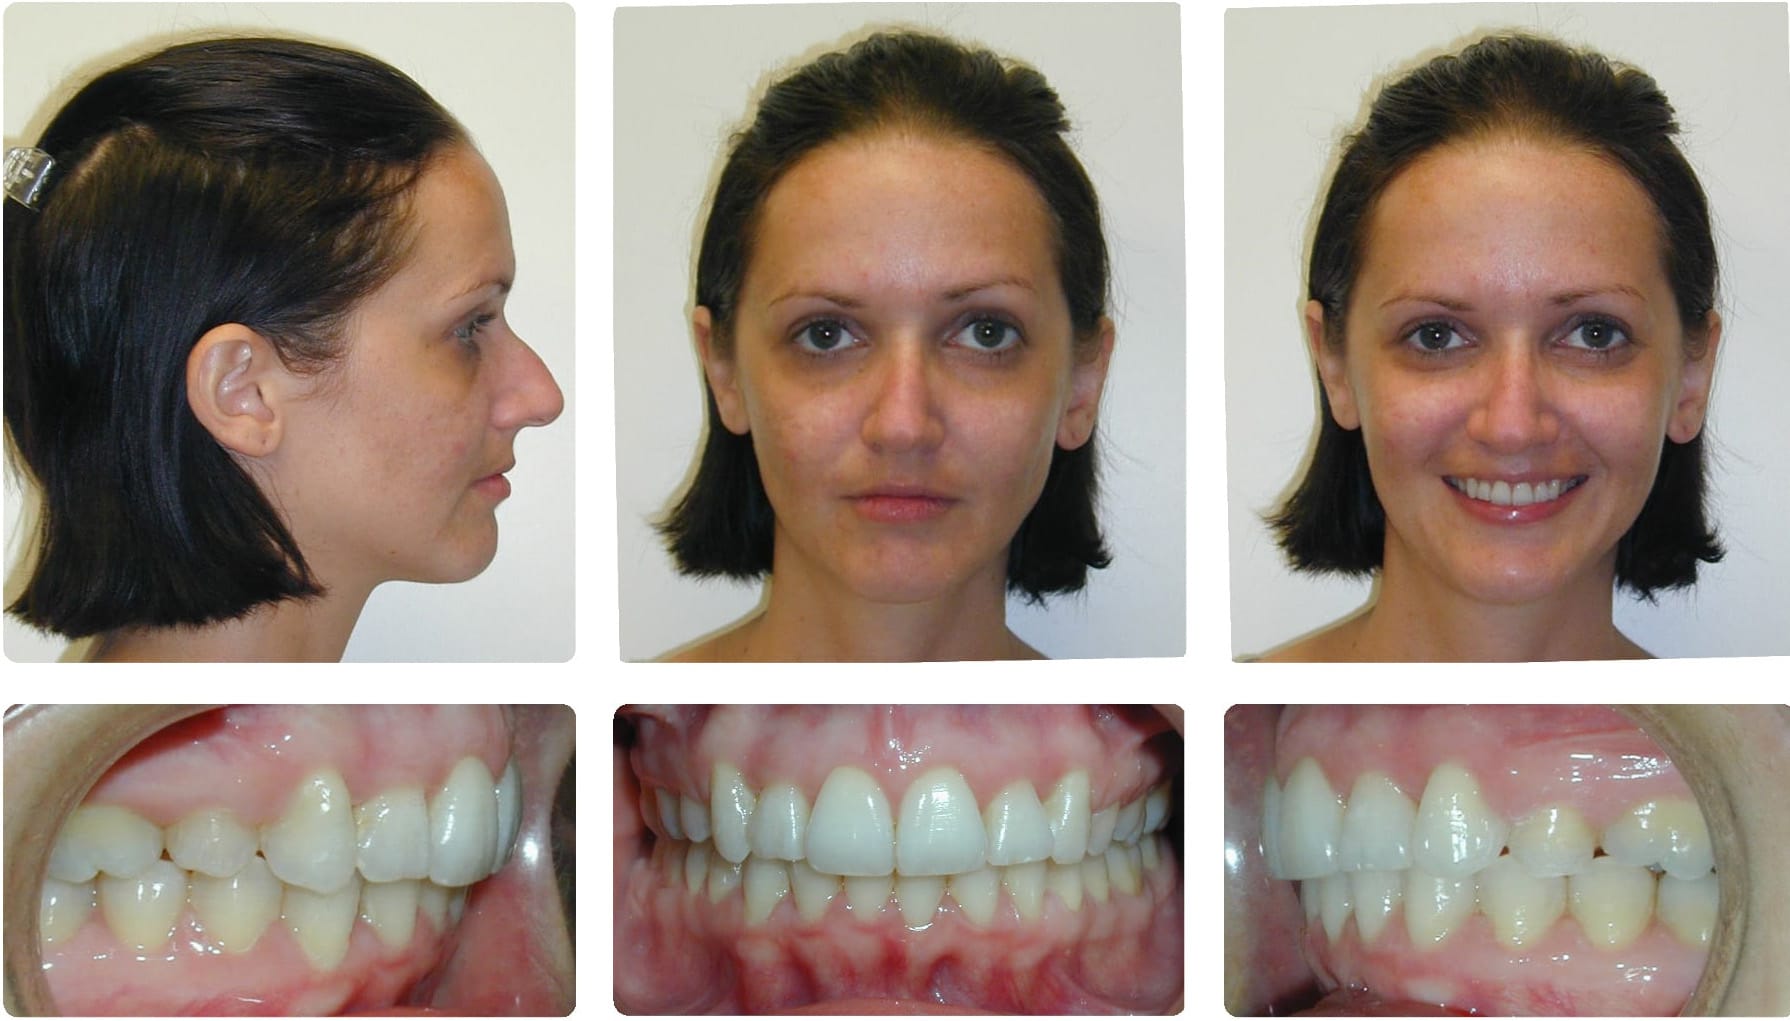 About Adult Braces Before And After